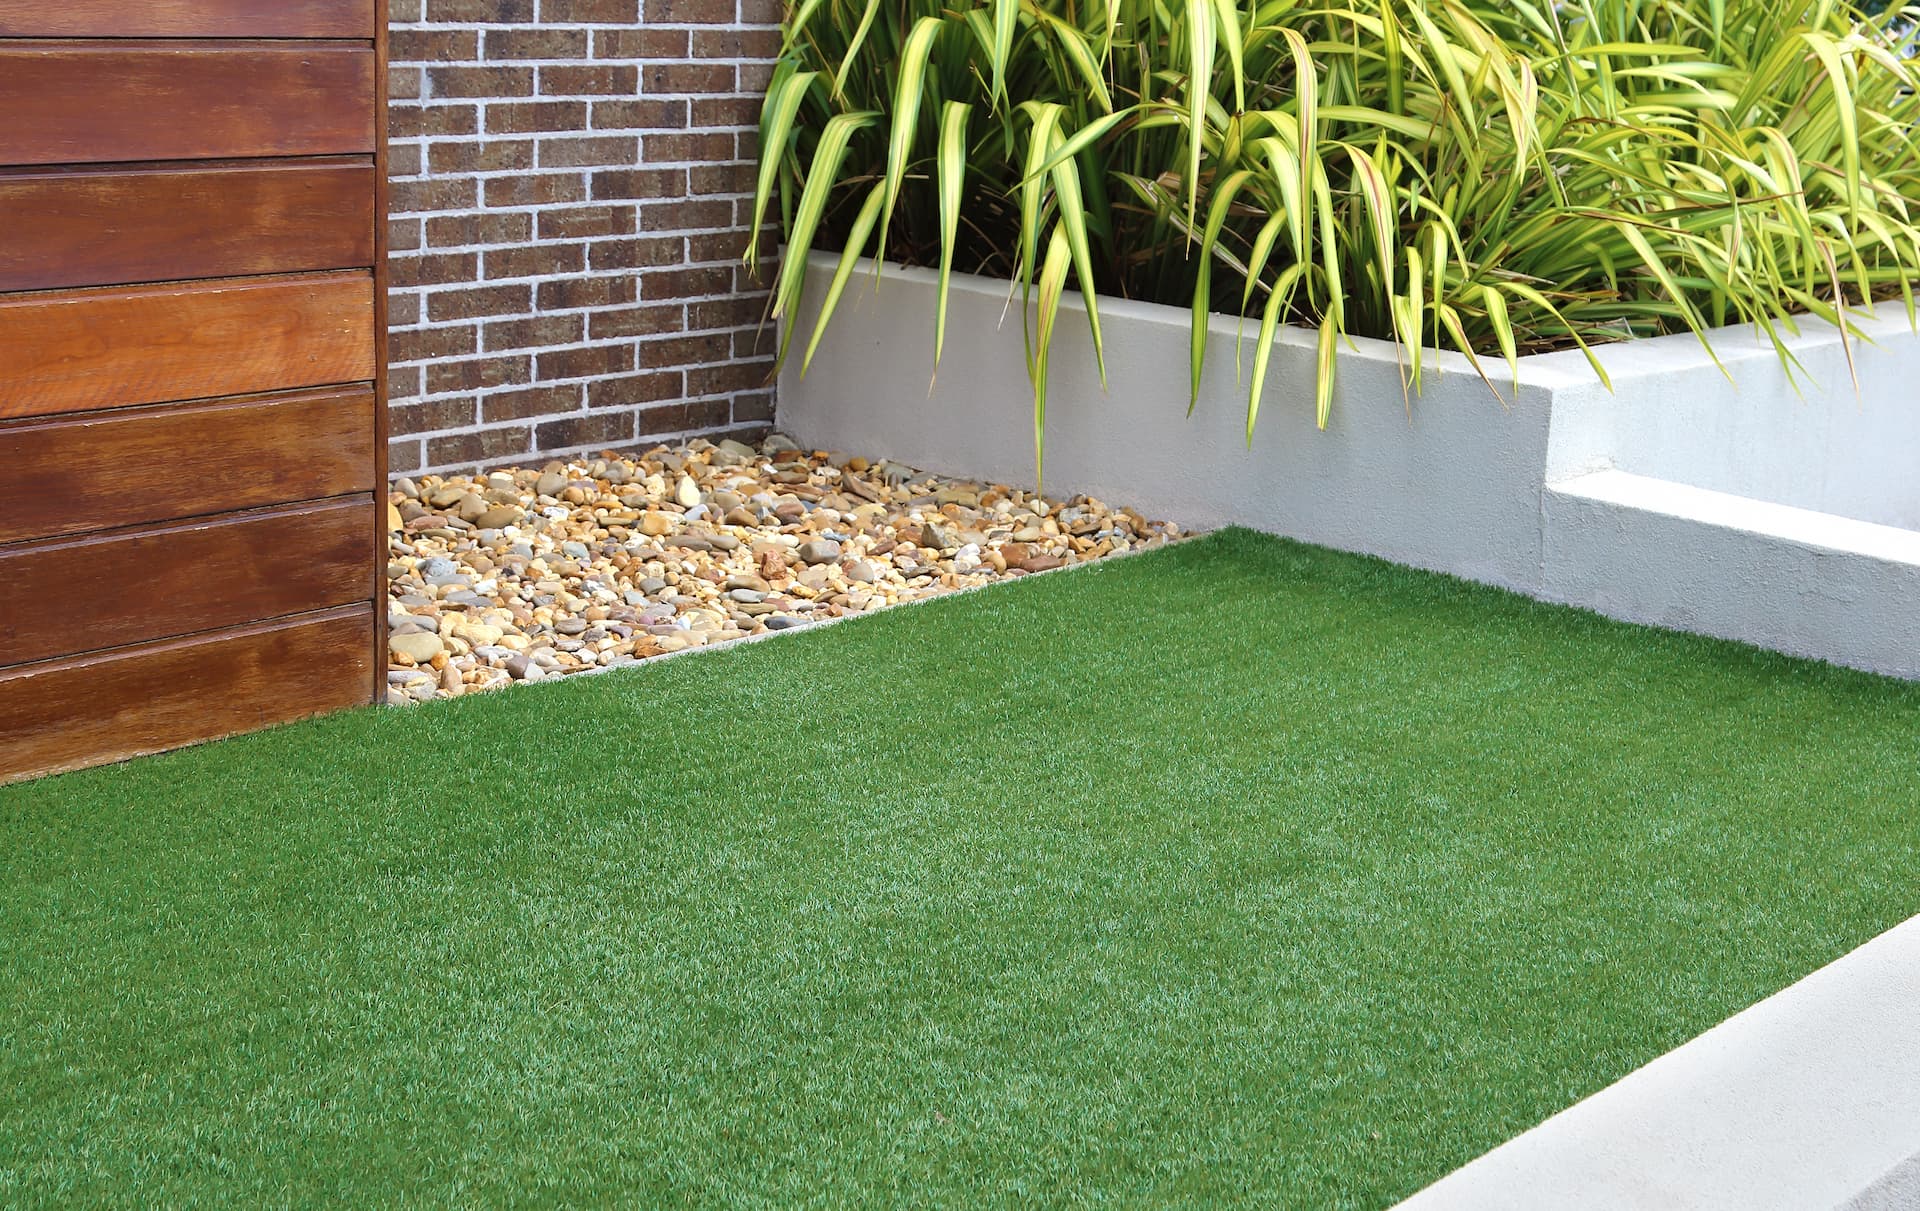 Licenced Artificial Grass & Turf services in Marple